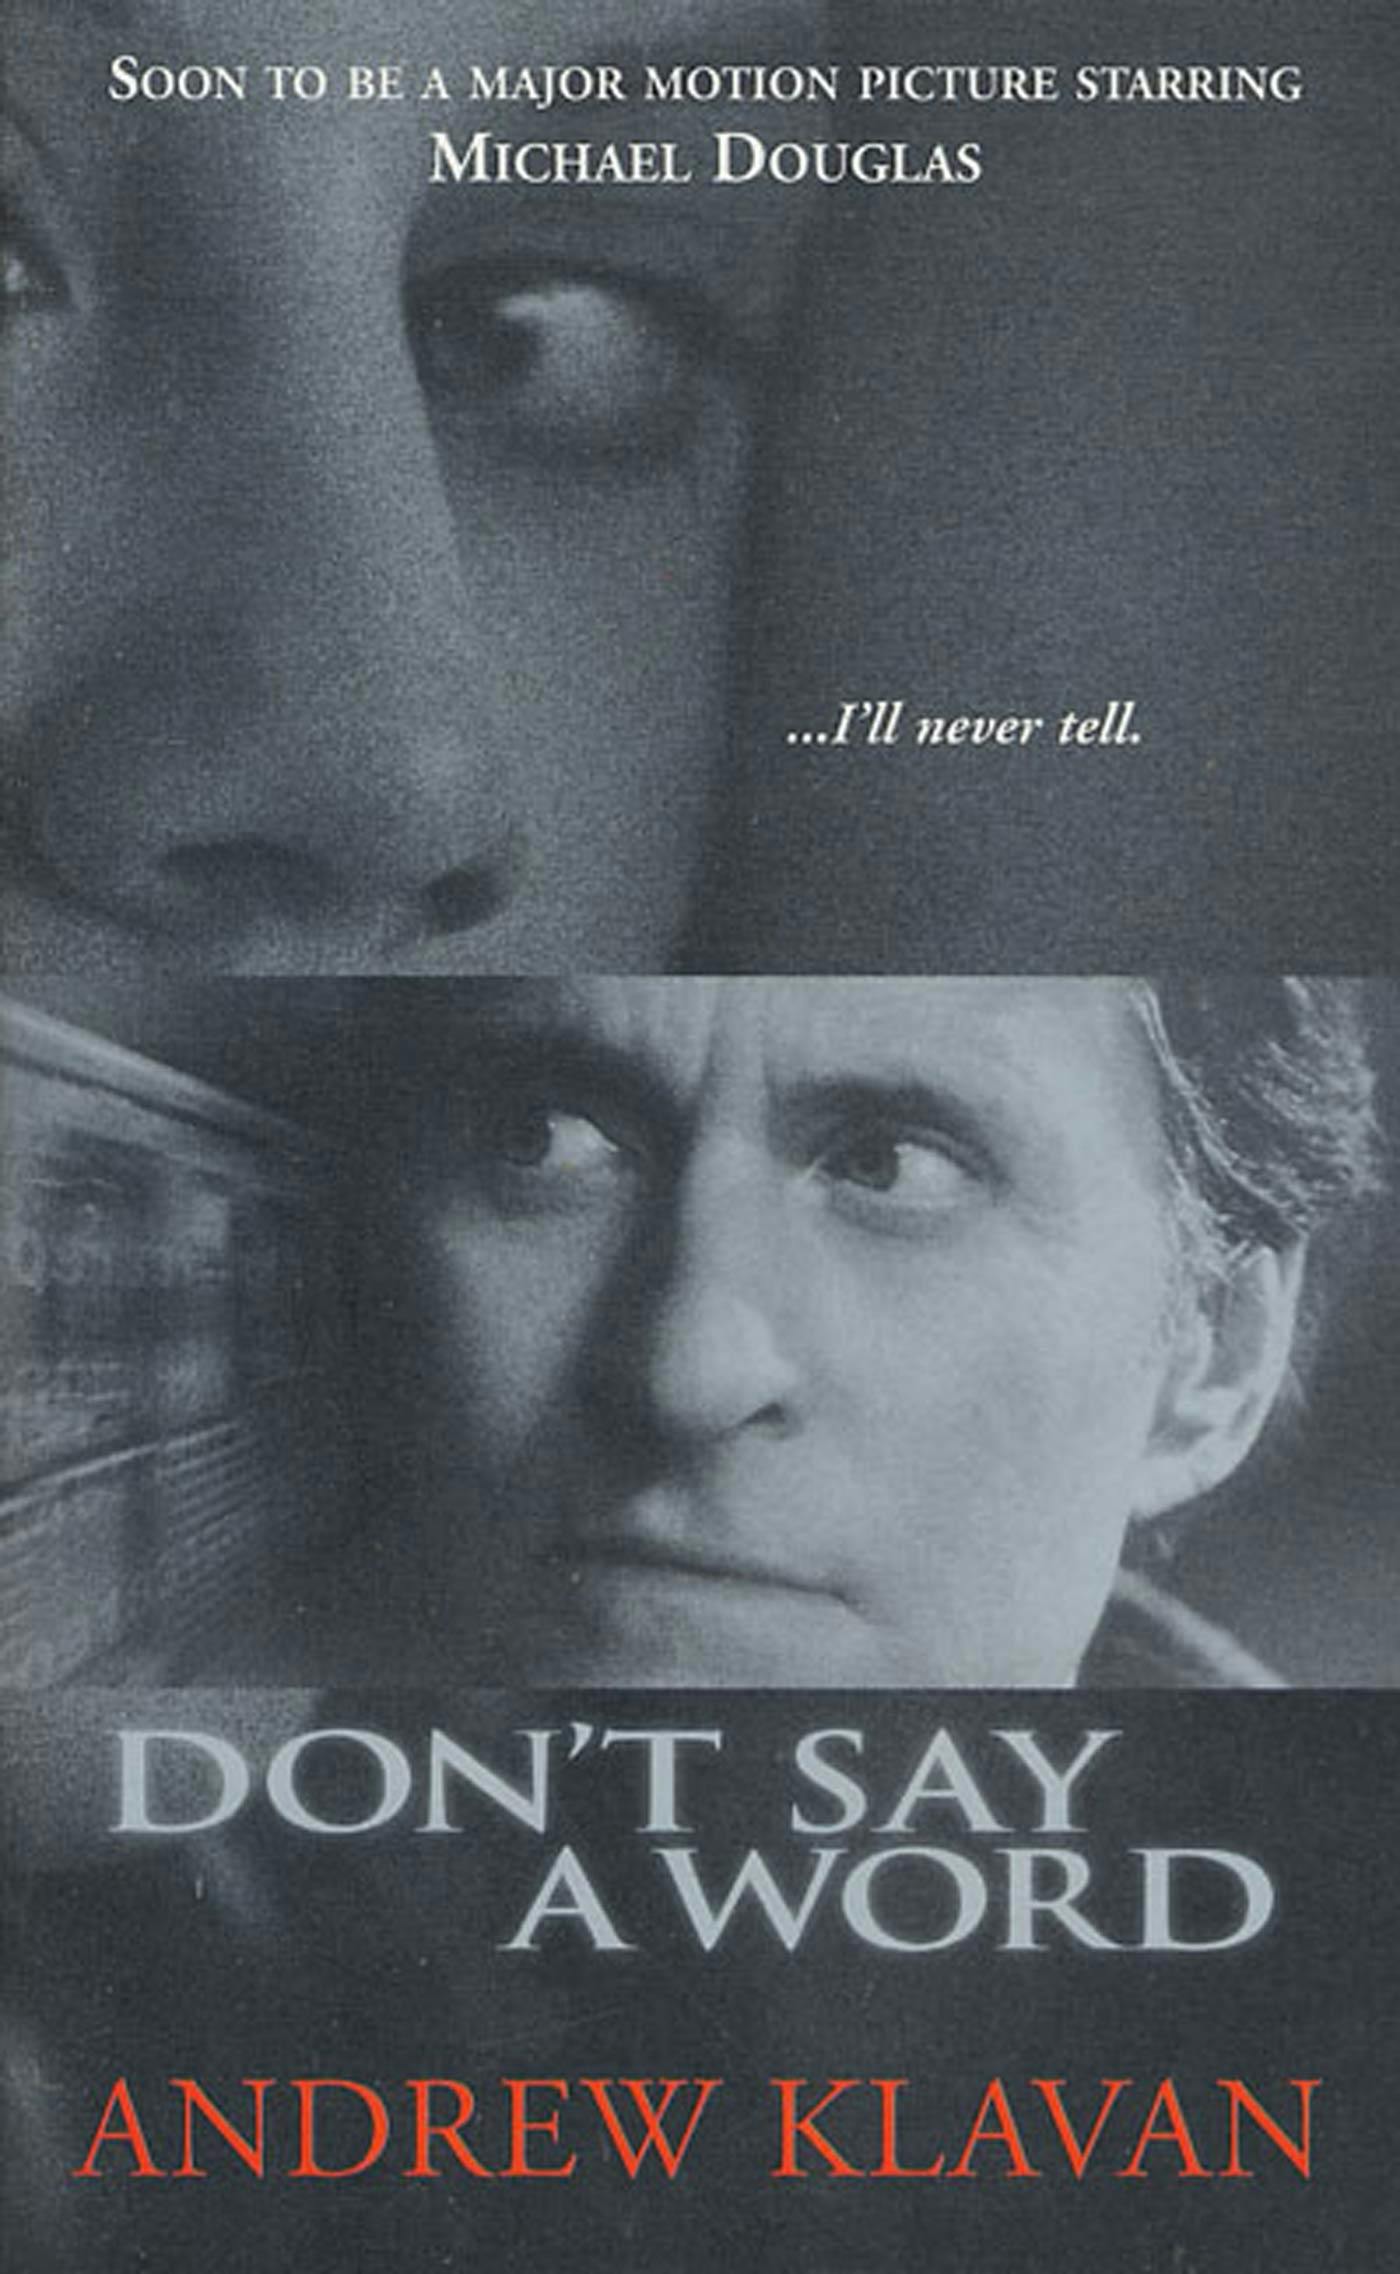 Cover for the book titled as: Don't Say a Word